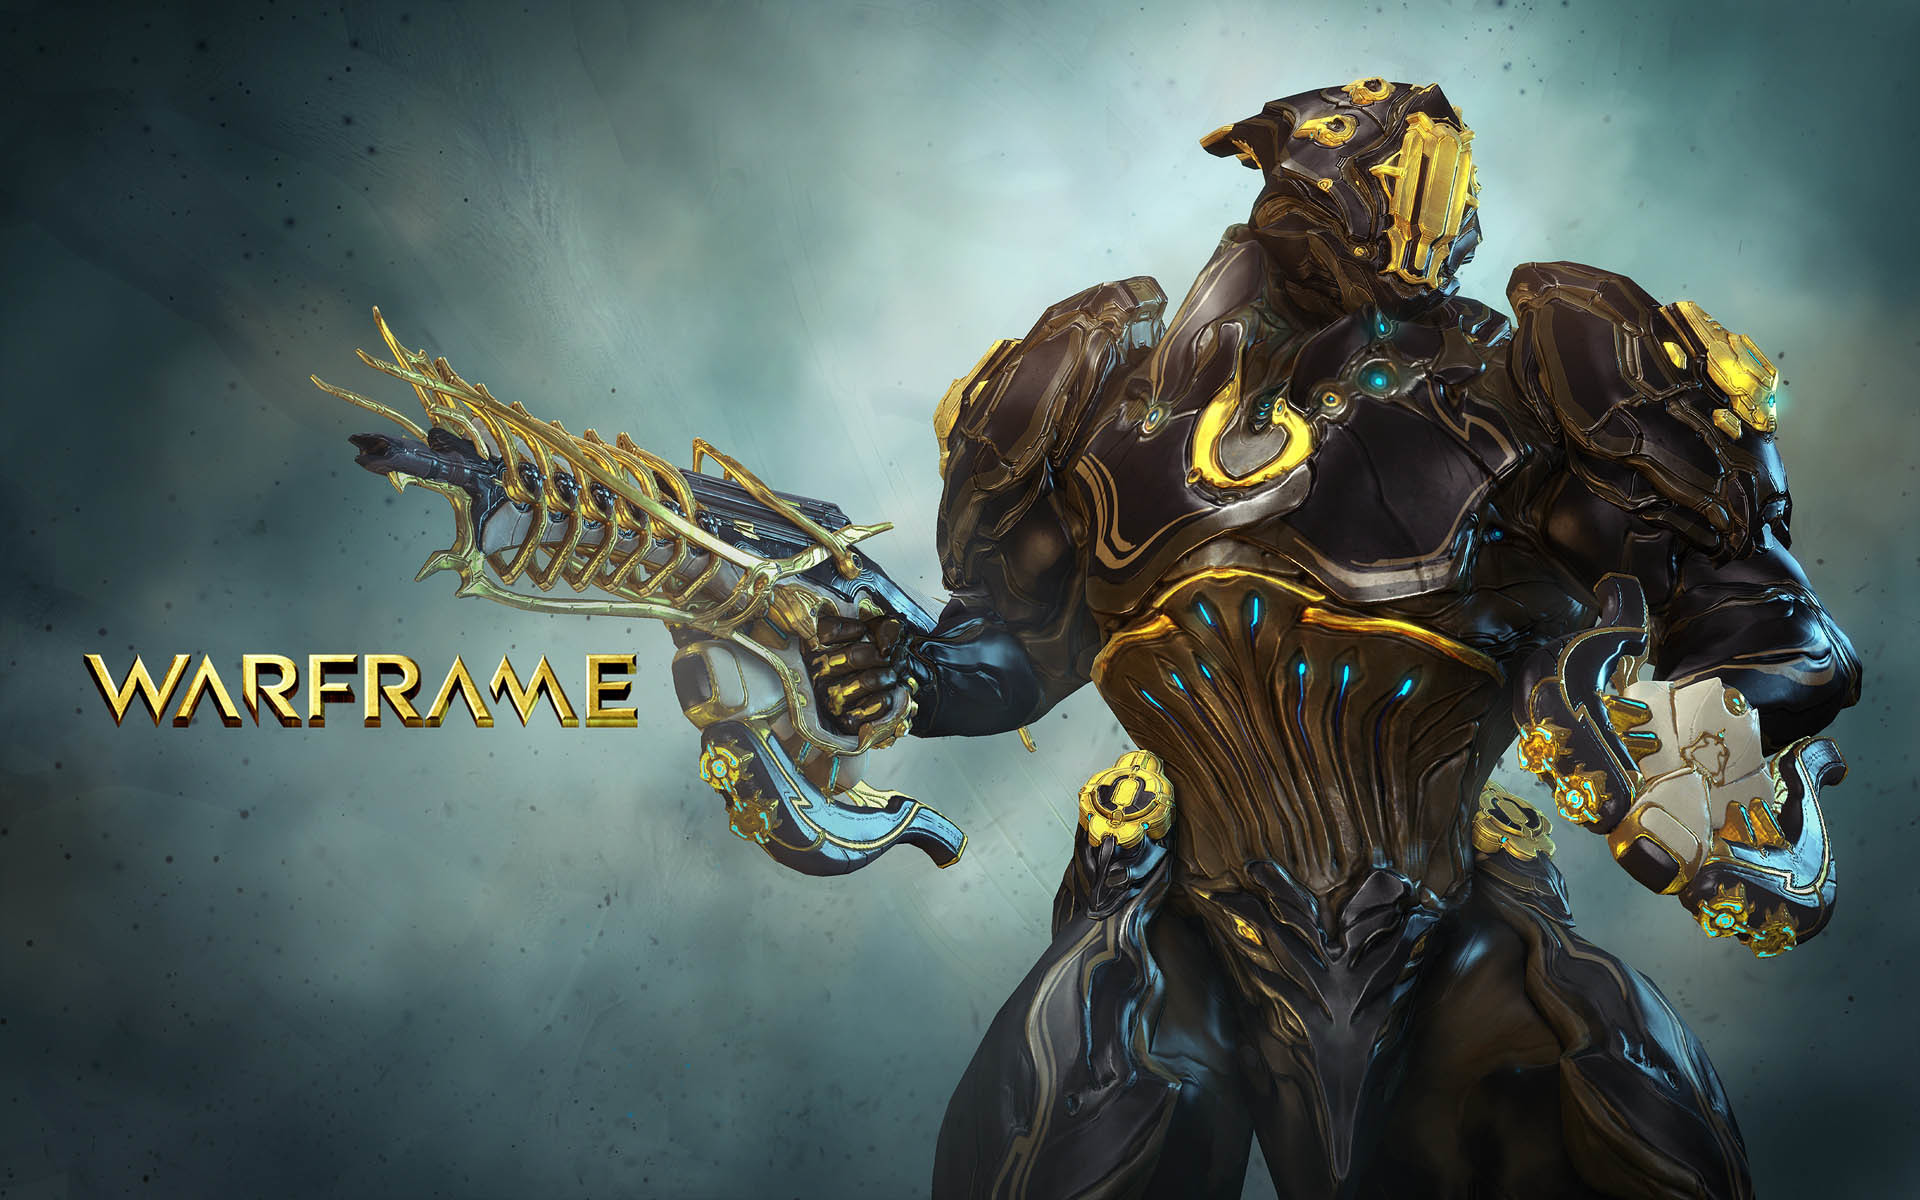 1920x1200 Download the following WarFrame 19208 image by clicking the orange button  positioned underneath the "Download Wallpaper" section.